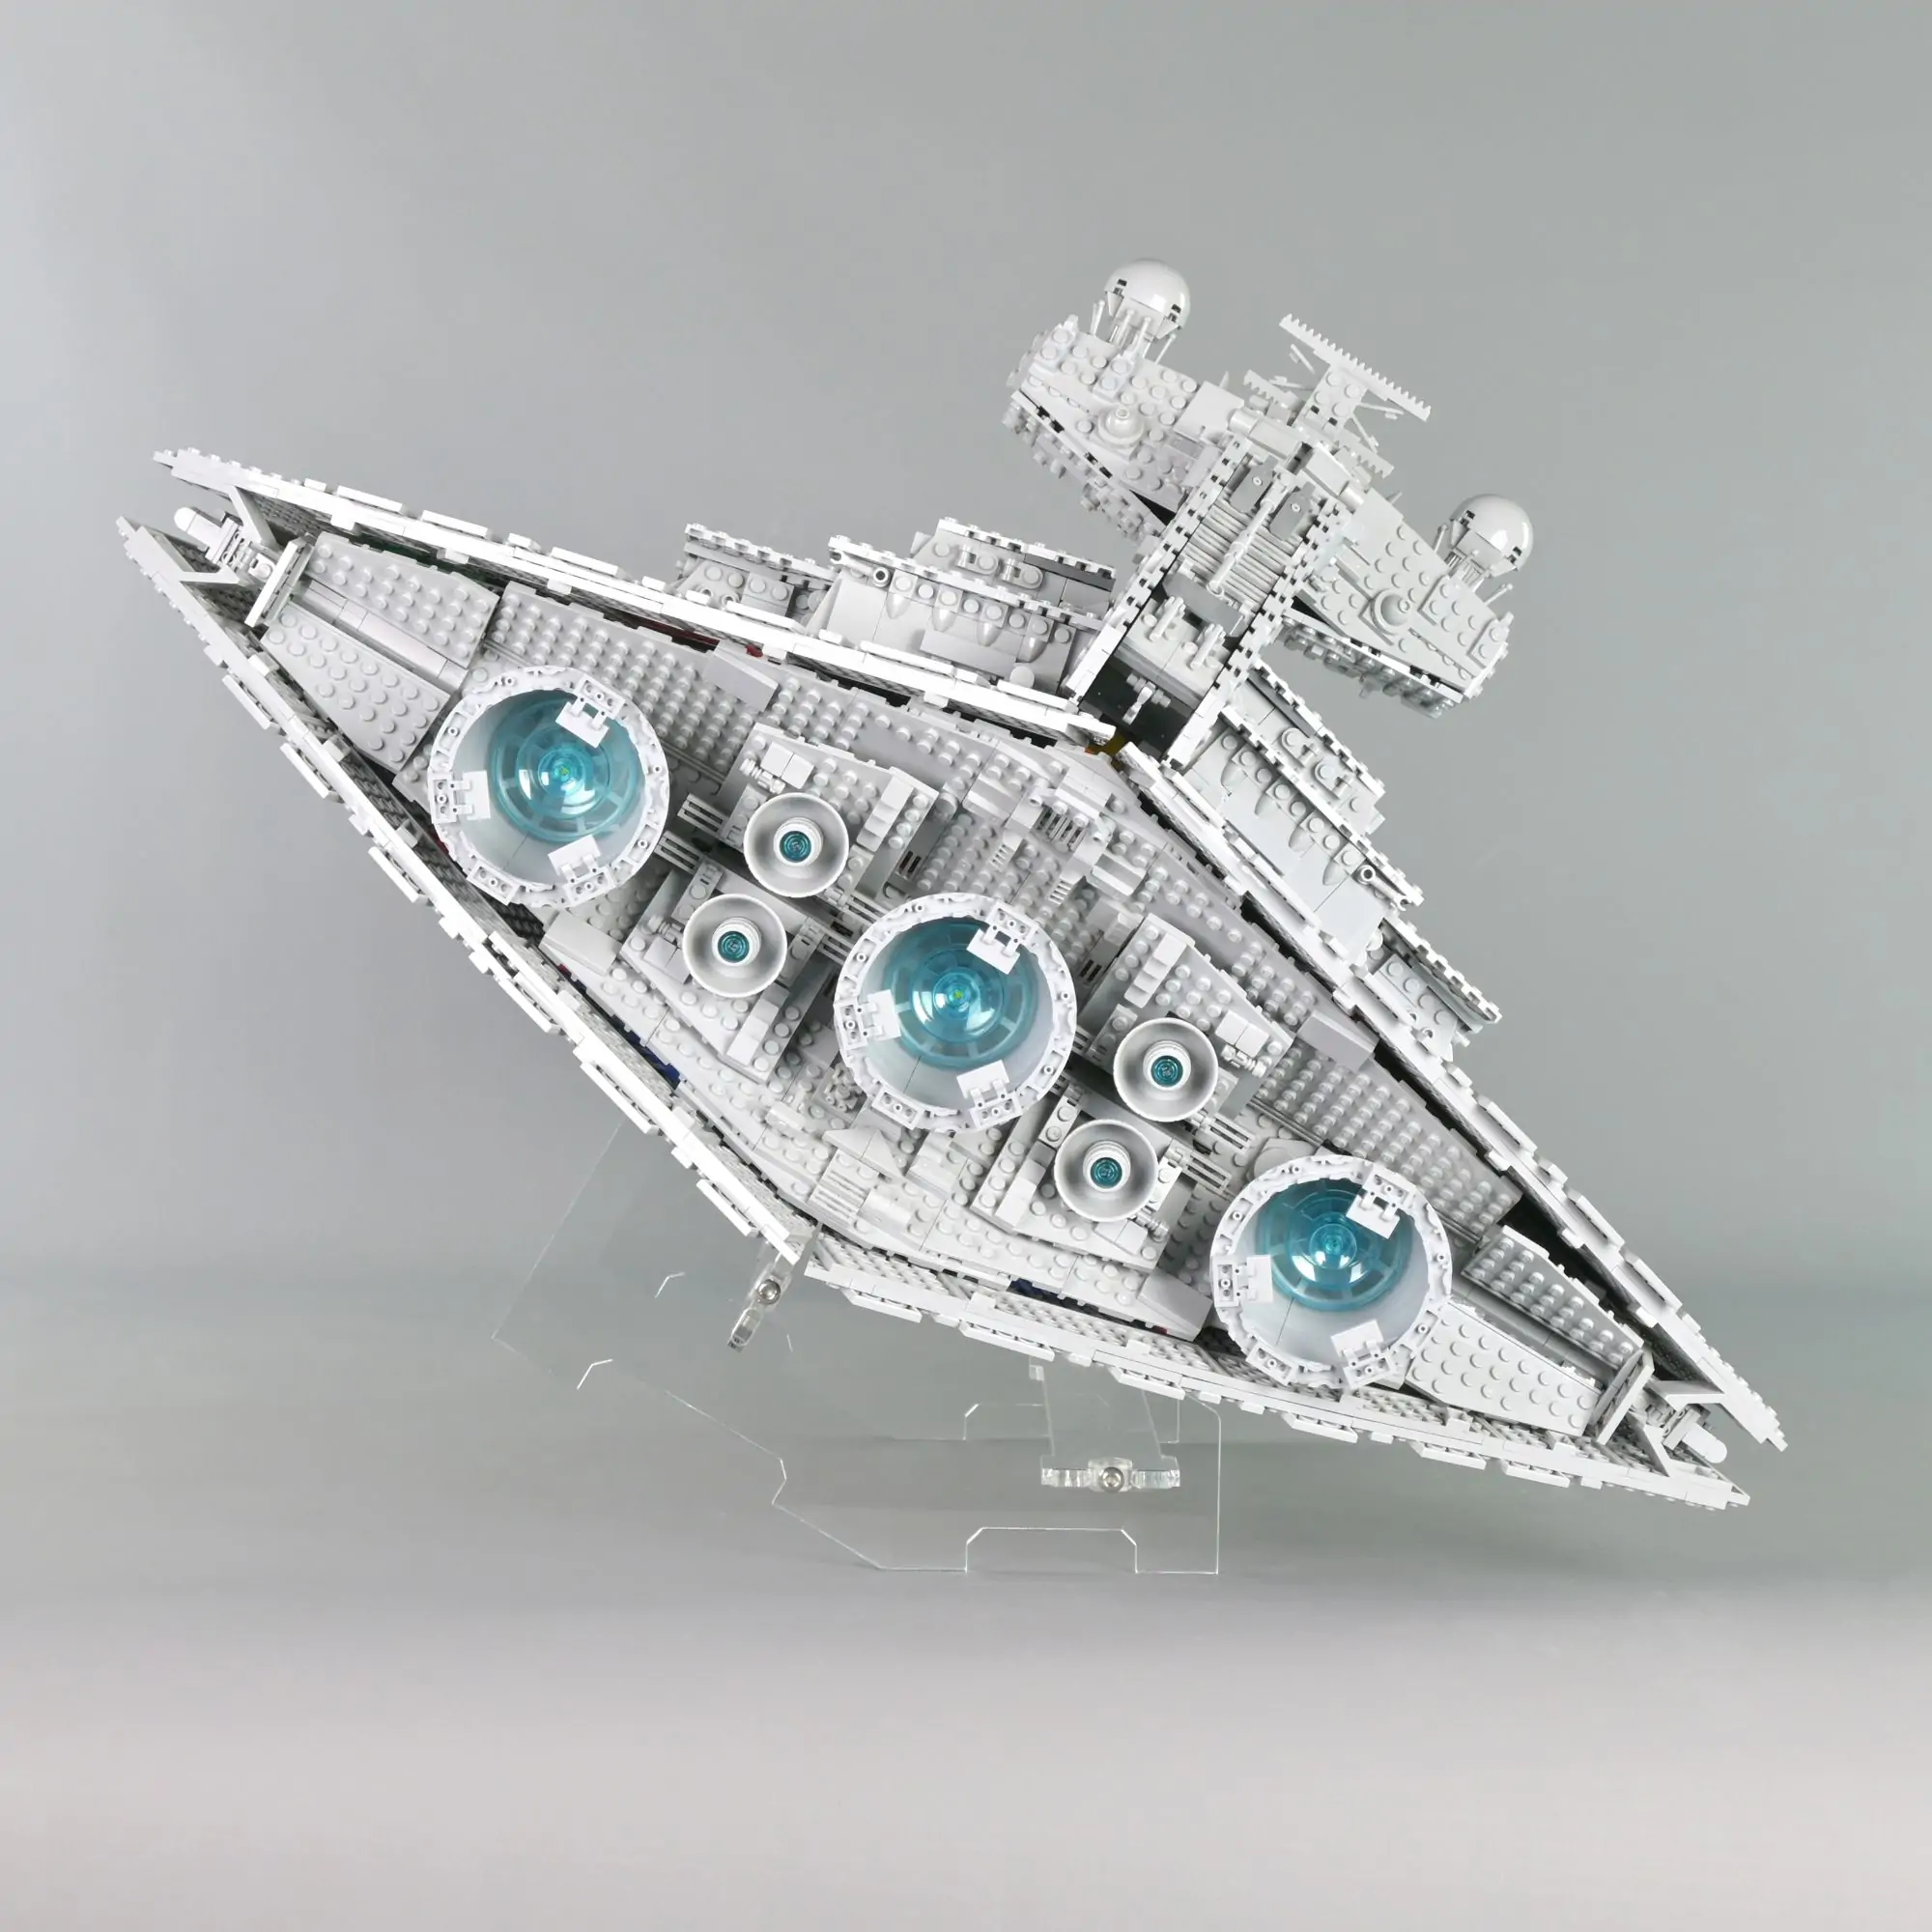 LEGO UCS Imperial Star Destroyer Clear Acrylic Display Stand |